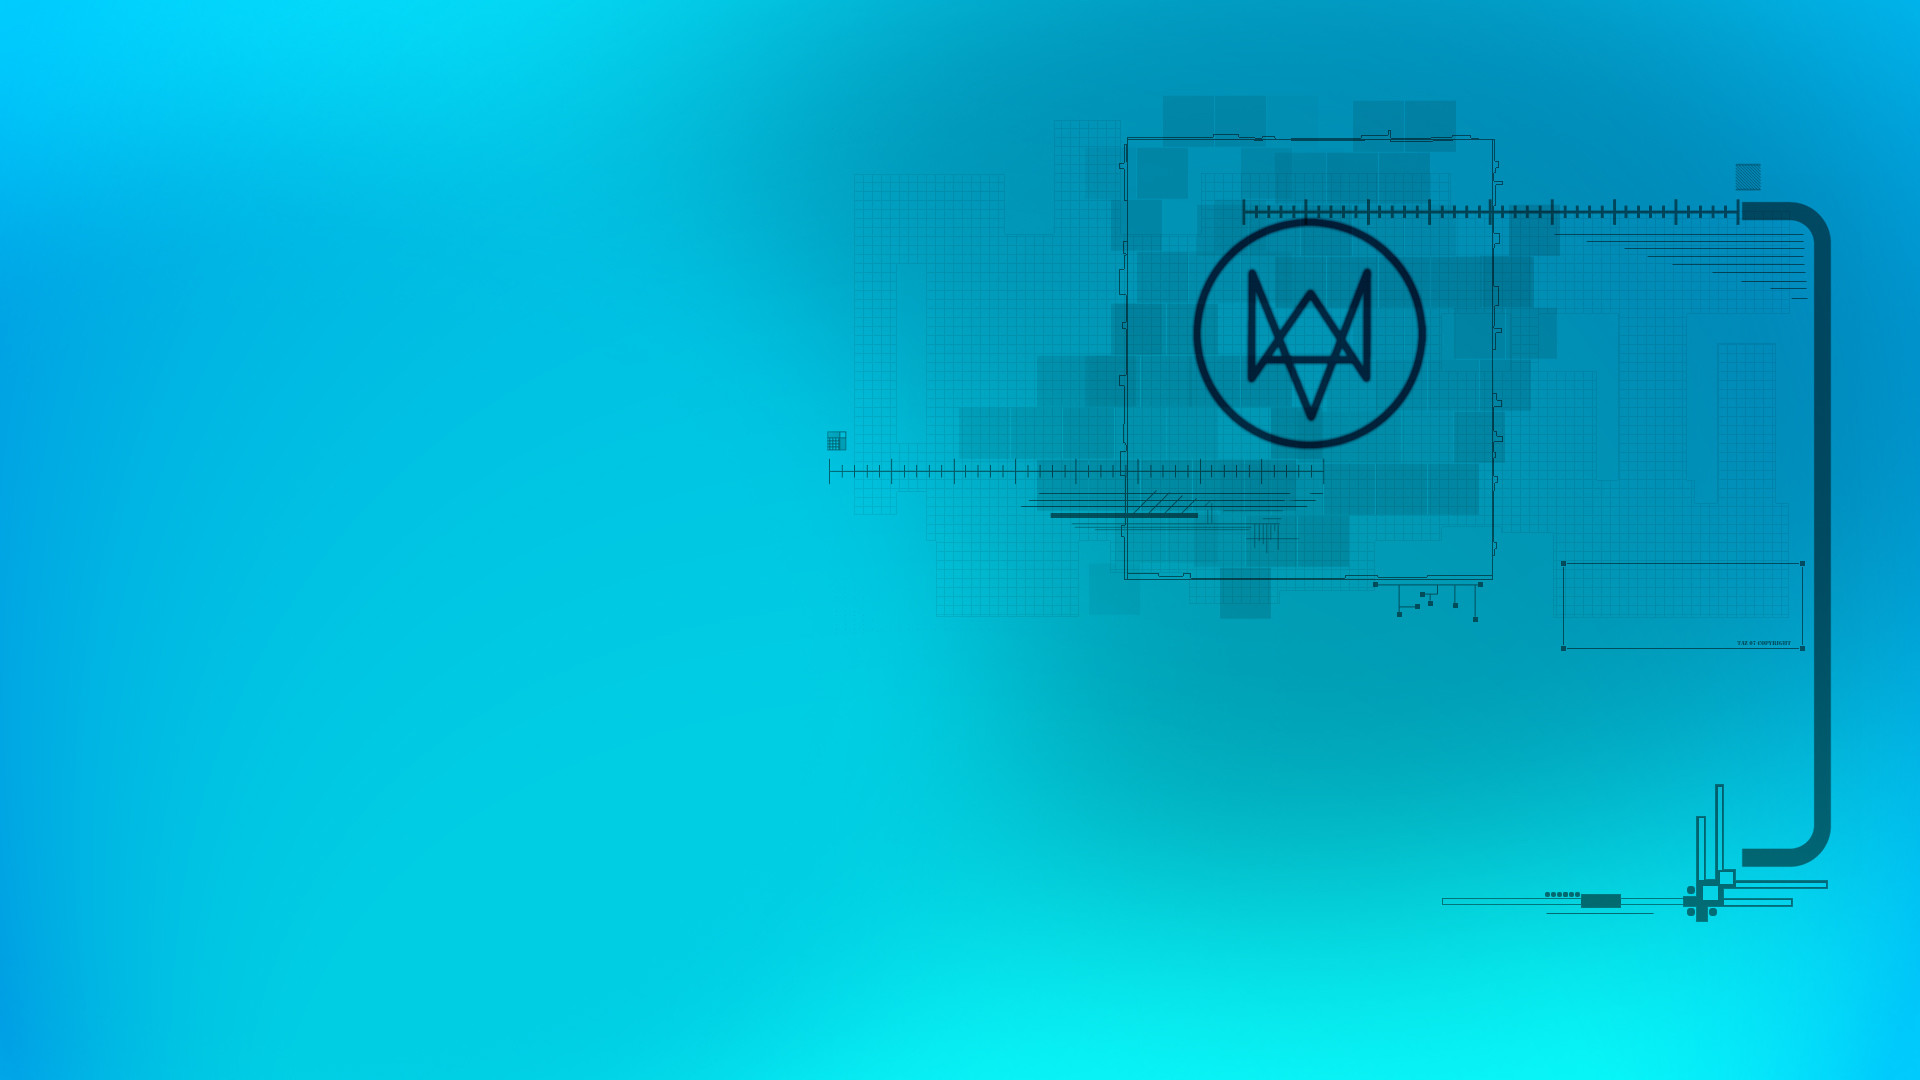 1920x1080 Watch Dogs Wallpaper HD by NIHILUSDESIGNS Watch Dogs Wallpaper HD by  NIHILUSDESIGNS